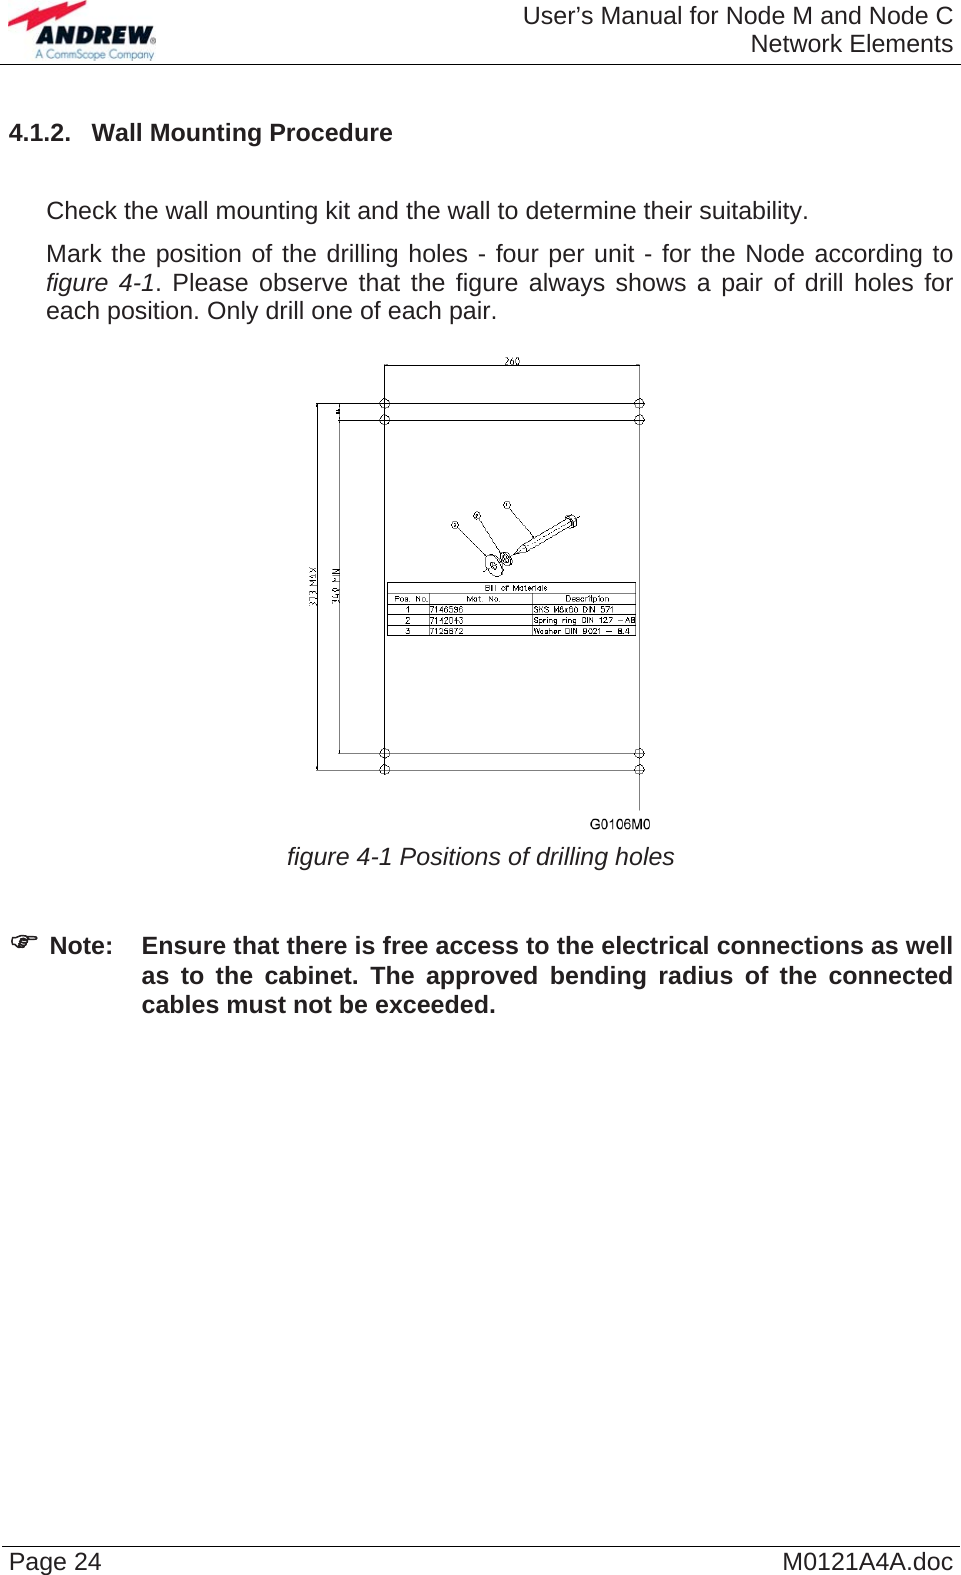  User’s Manual for Node M and Node CNetwork Elements Page 24  M0121A4A.doc4.1.2.  Wall Mounting Procedure     Check the wall mounting kit and the wall to determine their suitability.    Mark the position of the drilling holes - four per unit - for the Node according to figure 4-1. Please observe that the figure always shows a pair of drill holes for each position. Only drill one of each pair.   figure 4-1 Positions of drilling holes  ) Note:  Ensure that there is free access to the electrical connections as well as to the cabinet. The approved bending radius of the connected cables must not be exceeded.  